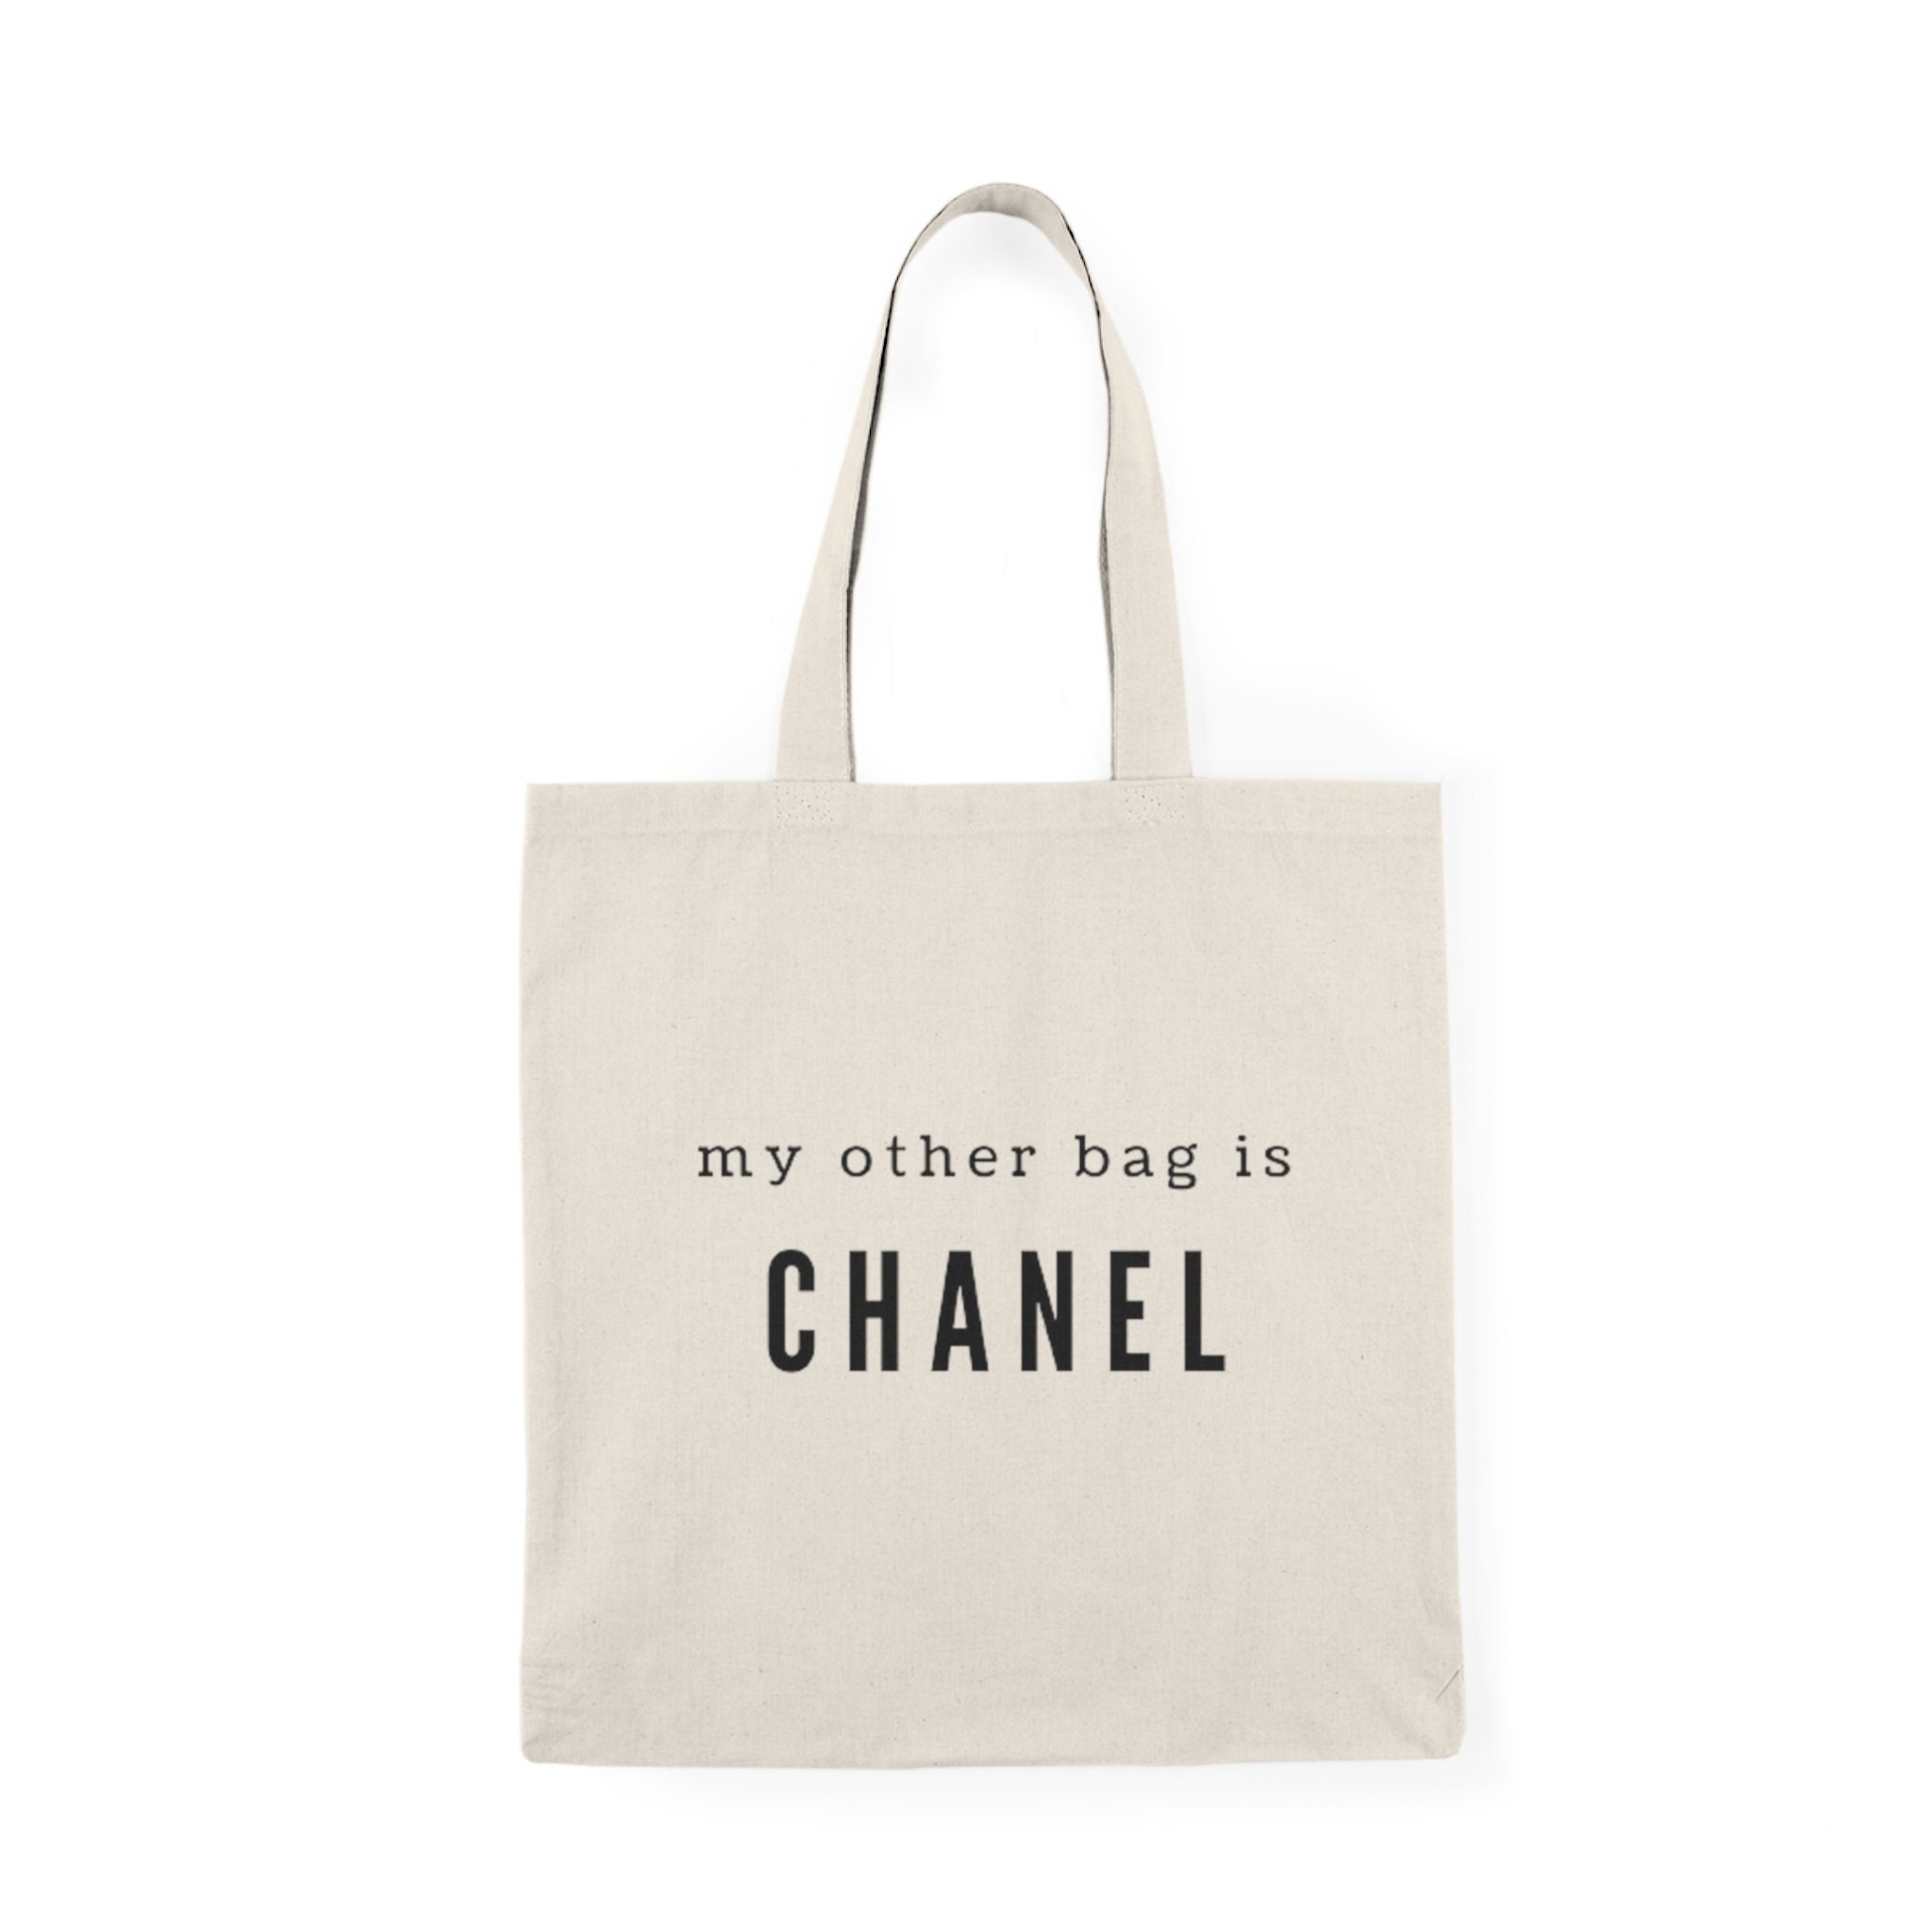 my other bag is chanel